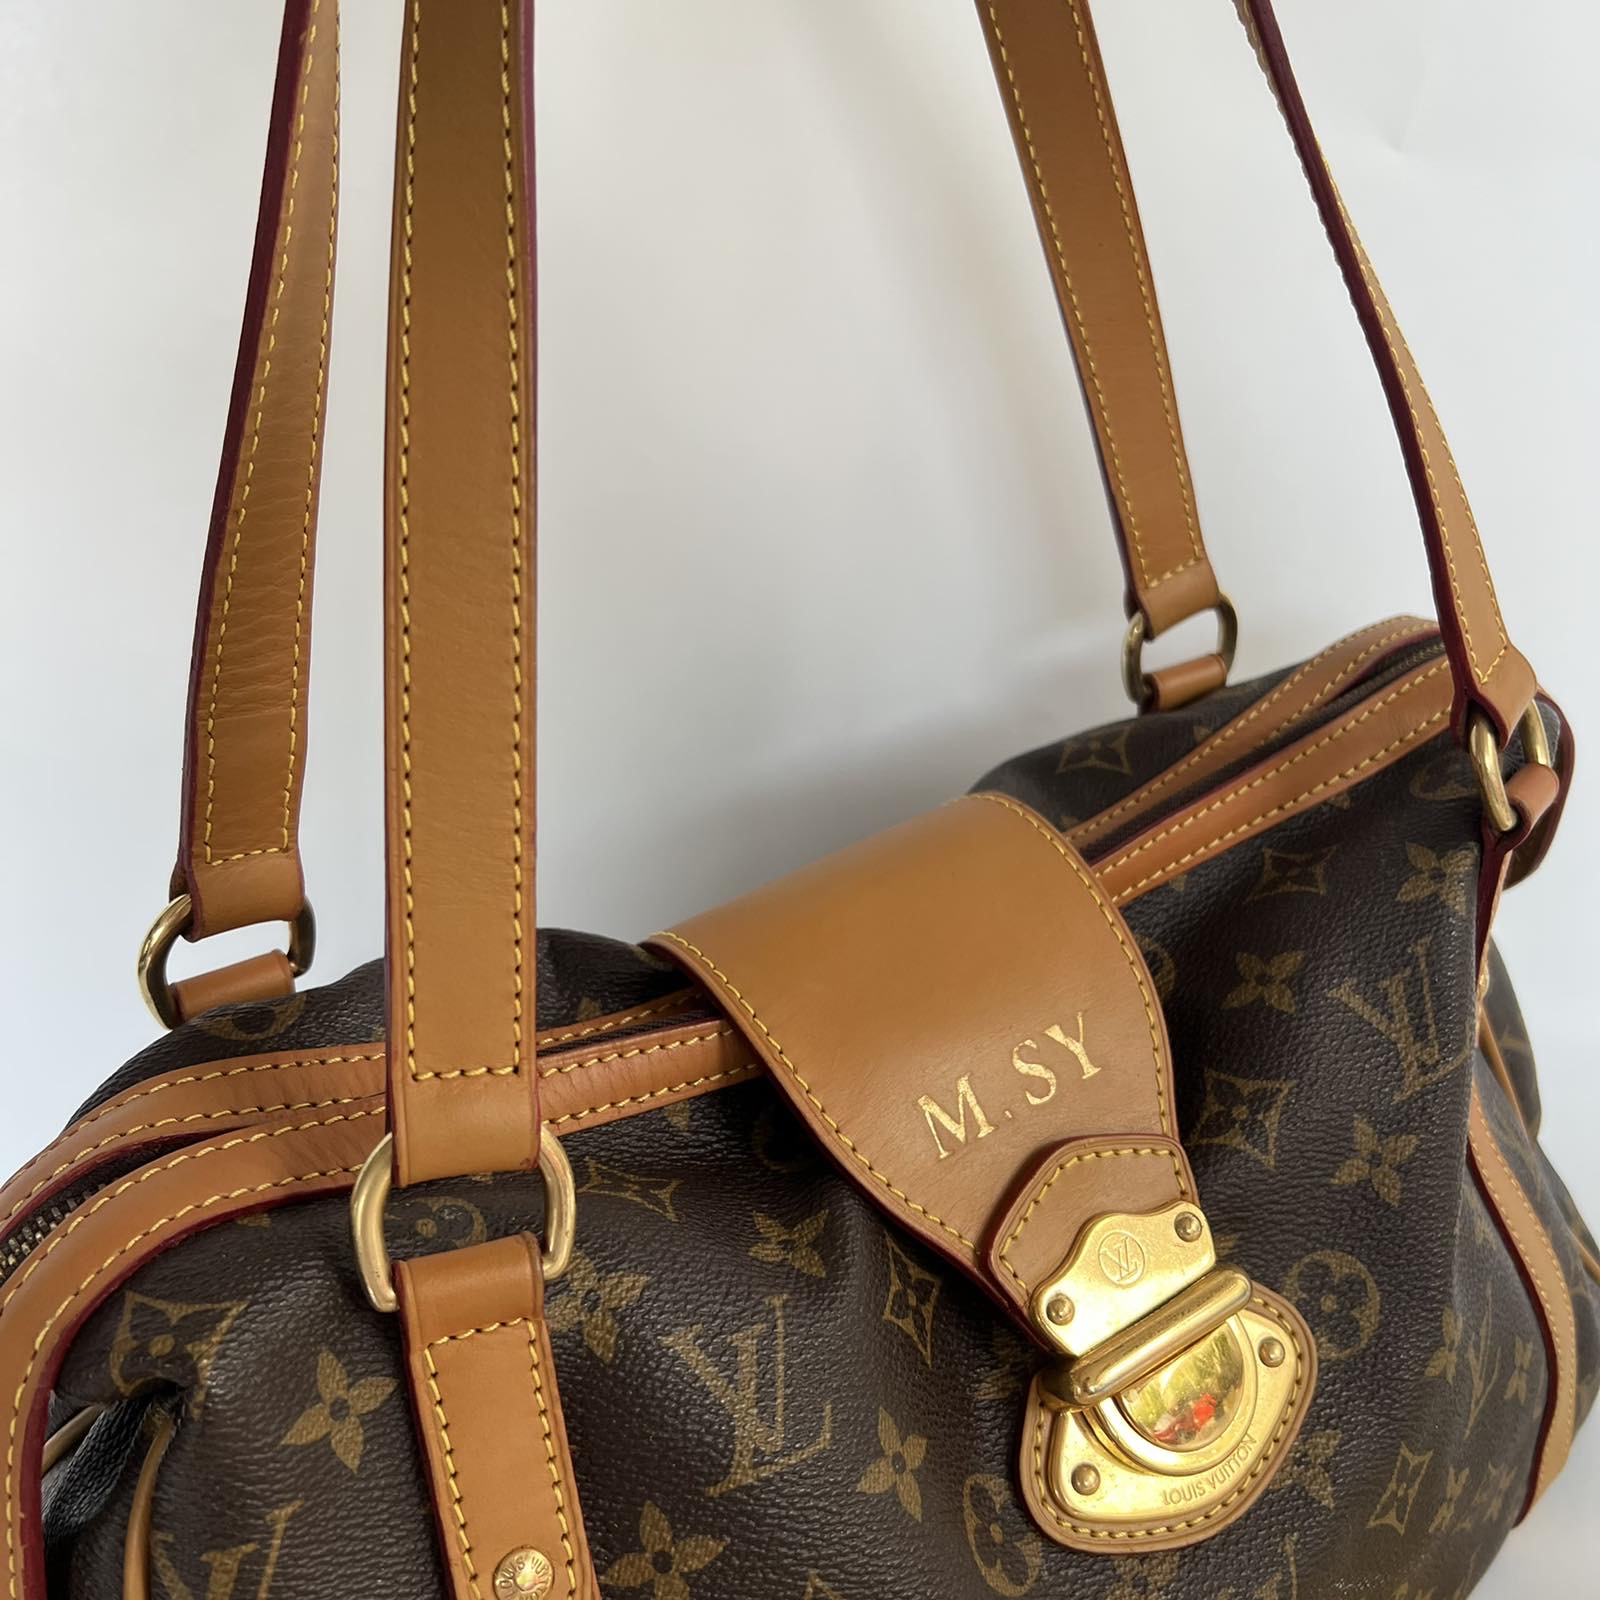 Louis Vuitton Monogram Canvas Stresa PM. DC: TR0111. With dustbag &  certificate of authenticity from ENTRUPY ❤️